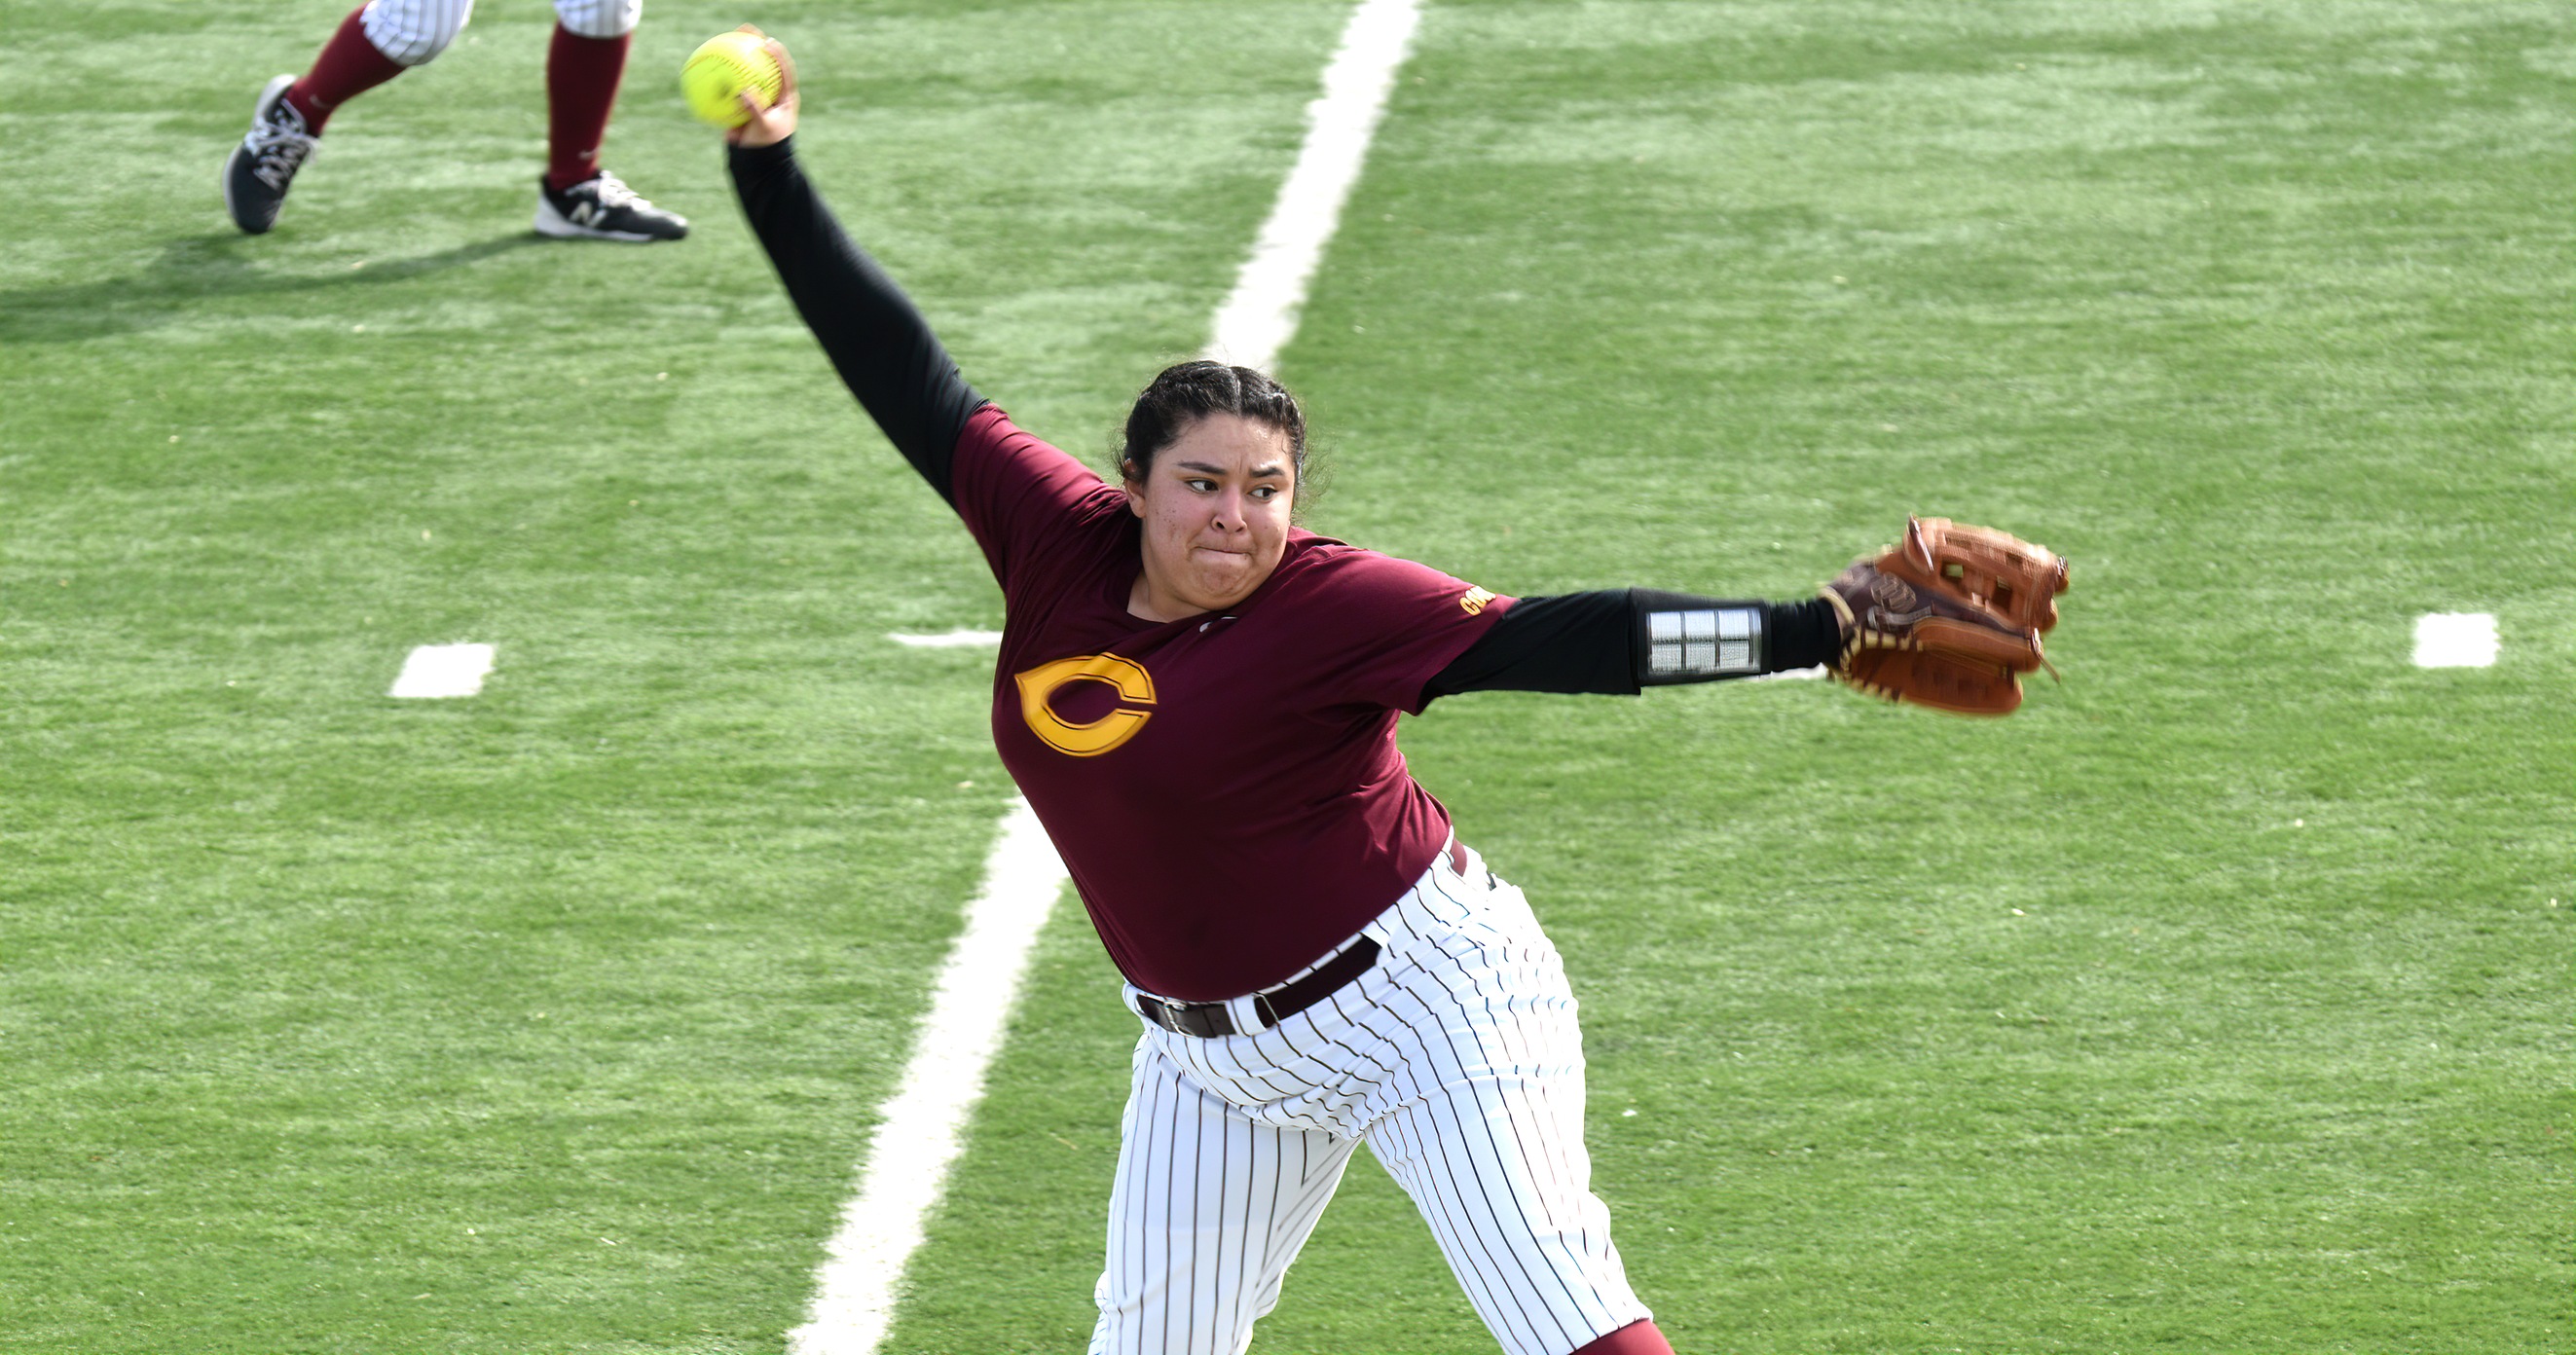 Senior Vanessa Ramos pitched 3.0 innings in the Cobbers' opener at Augsburg. She didn't allow a run on three hits and struck three batters.